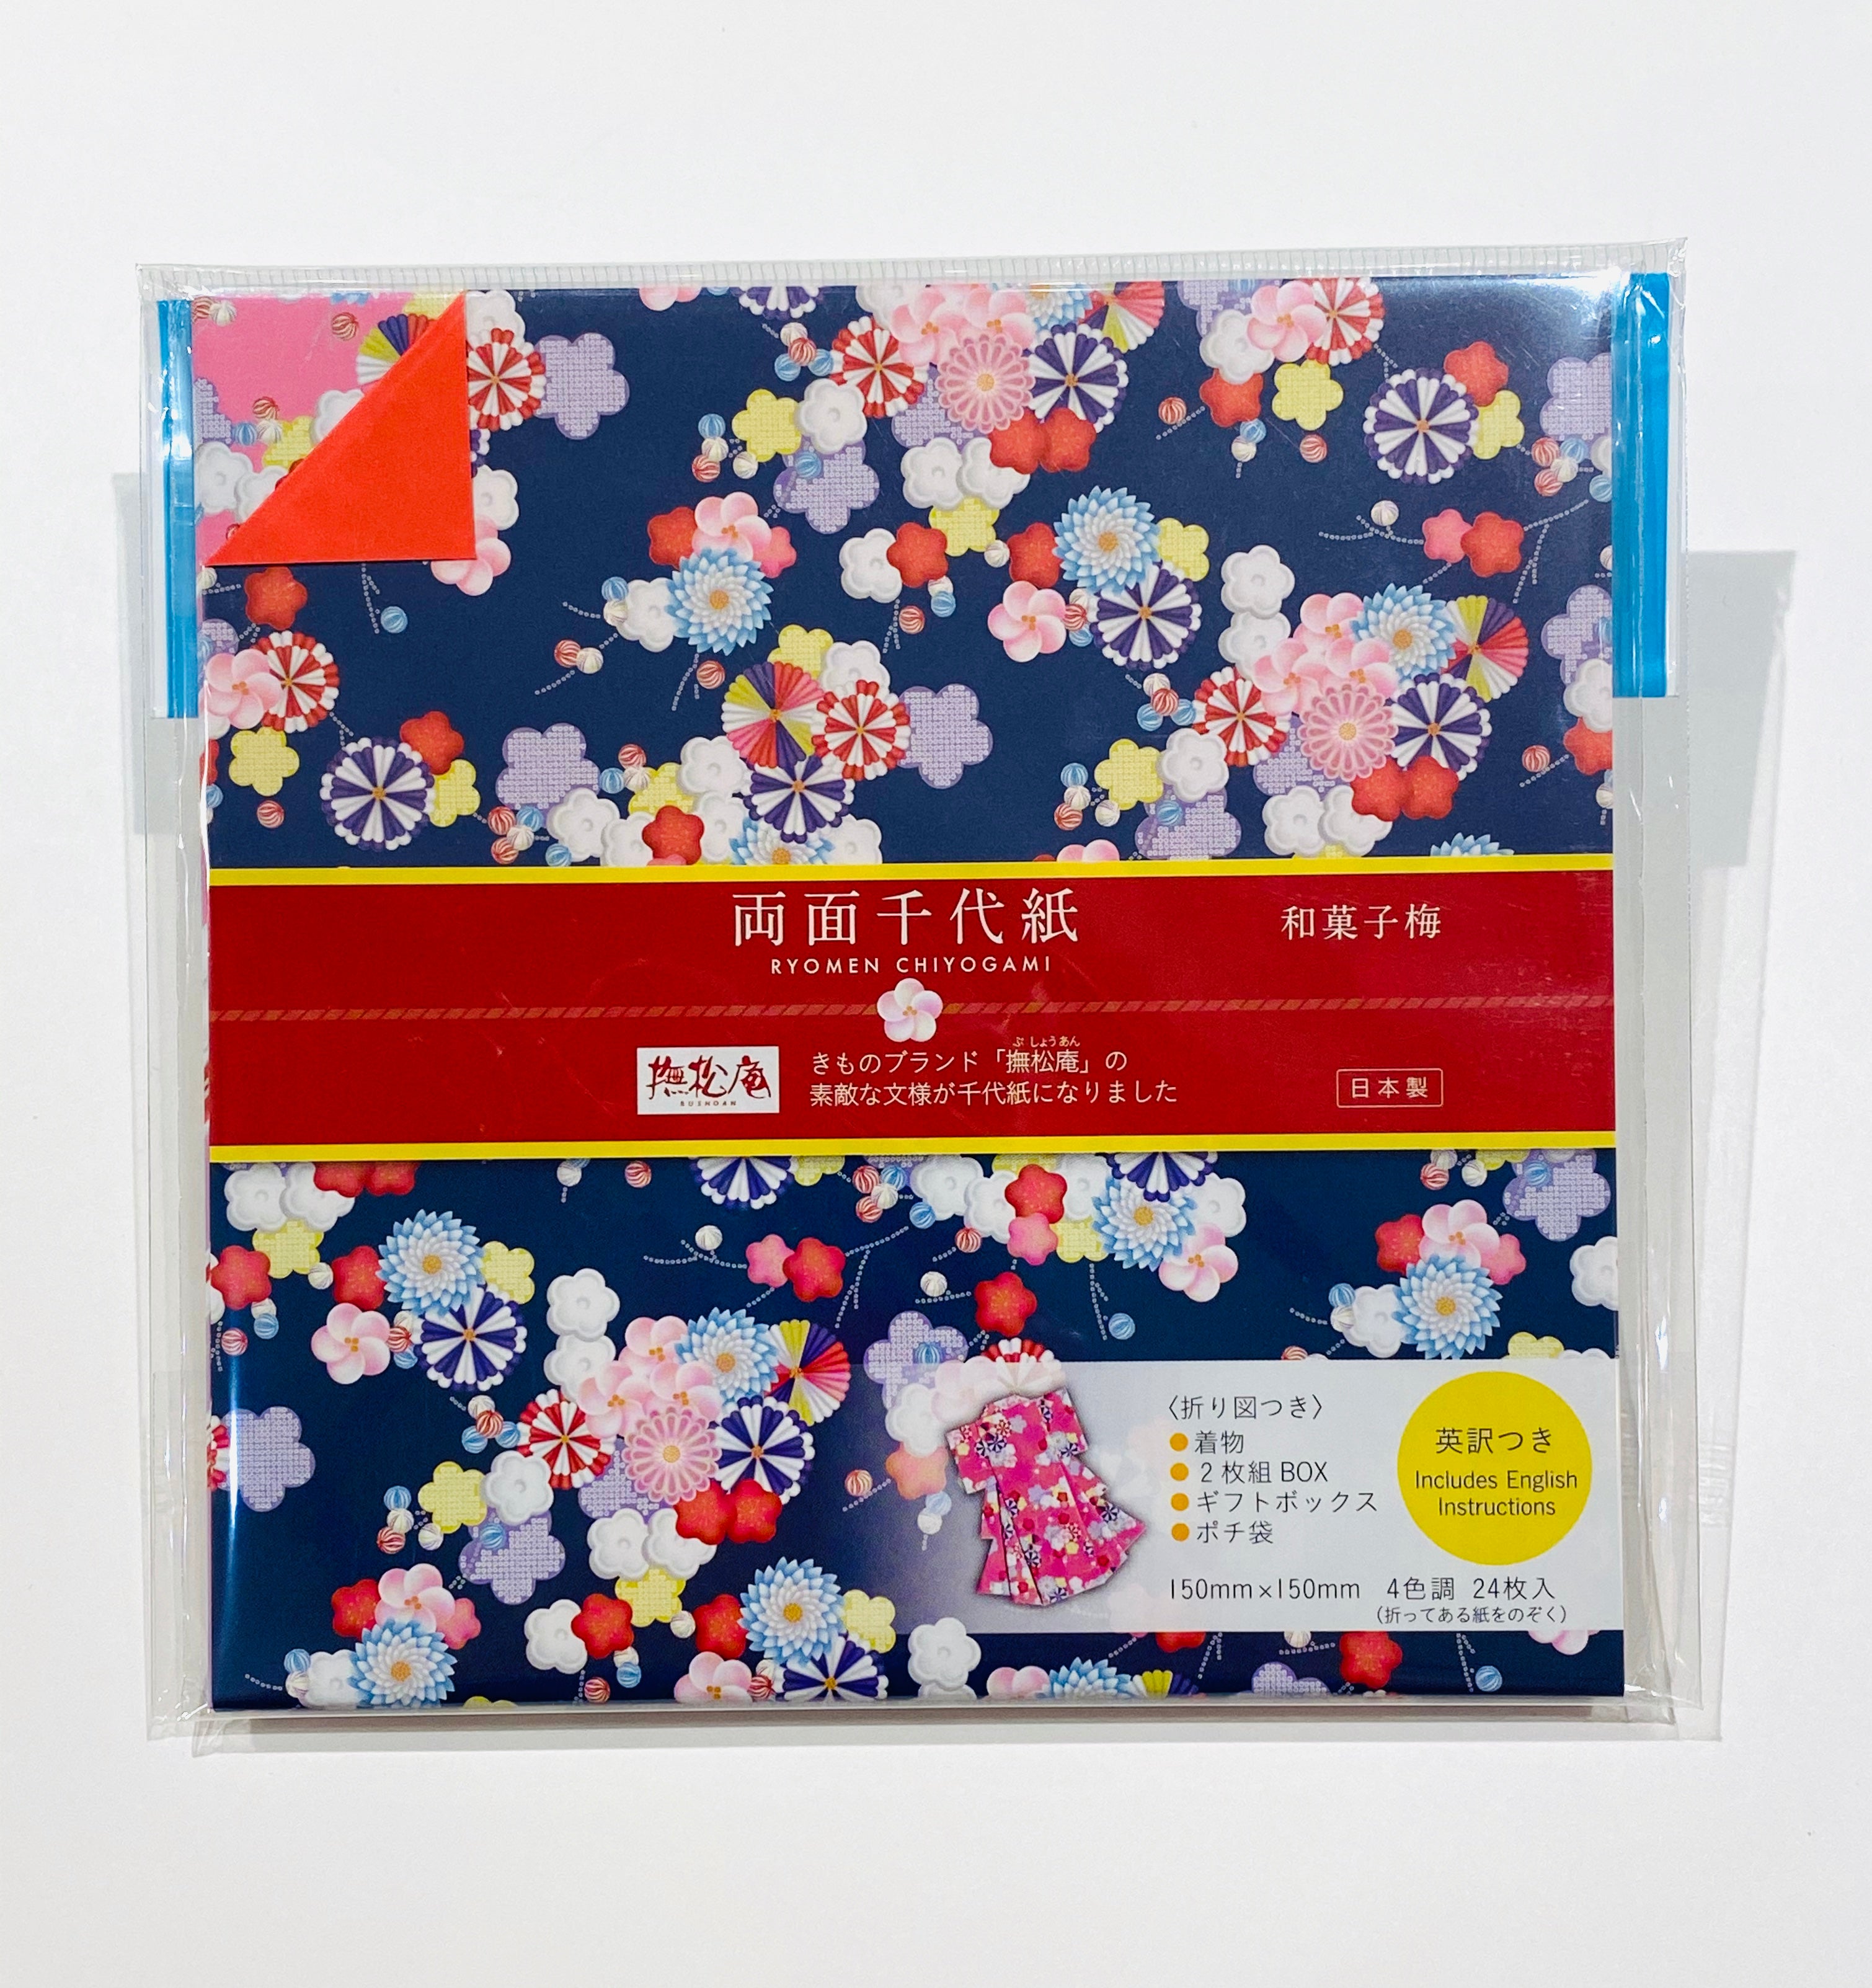 Wagashi Blossoms Double-sided Origami Paper